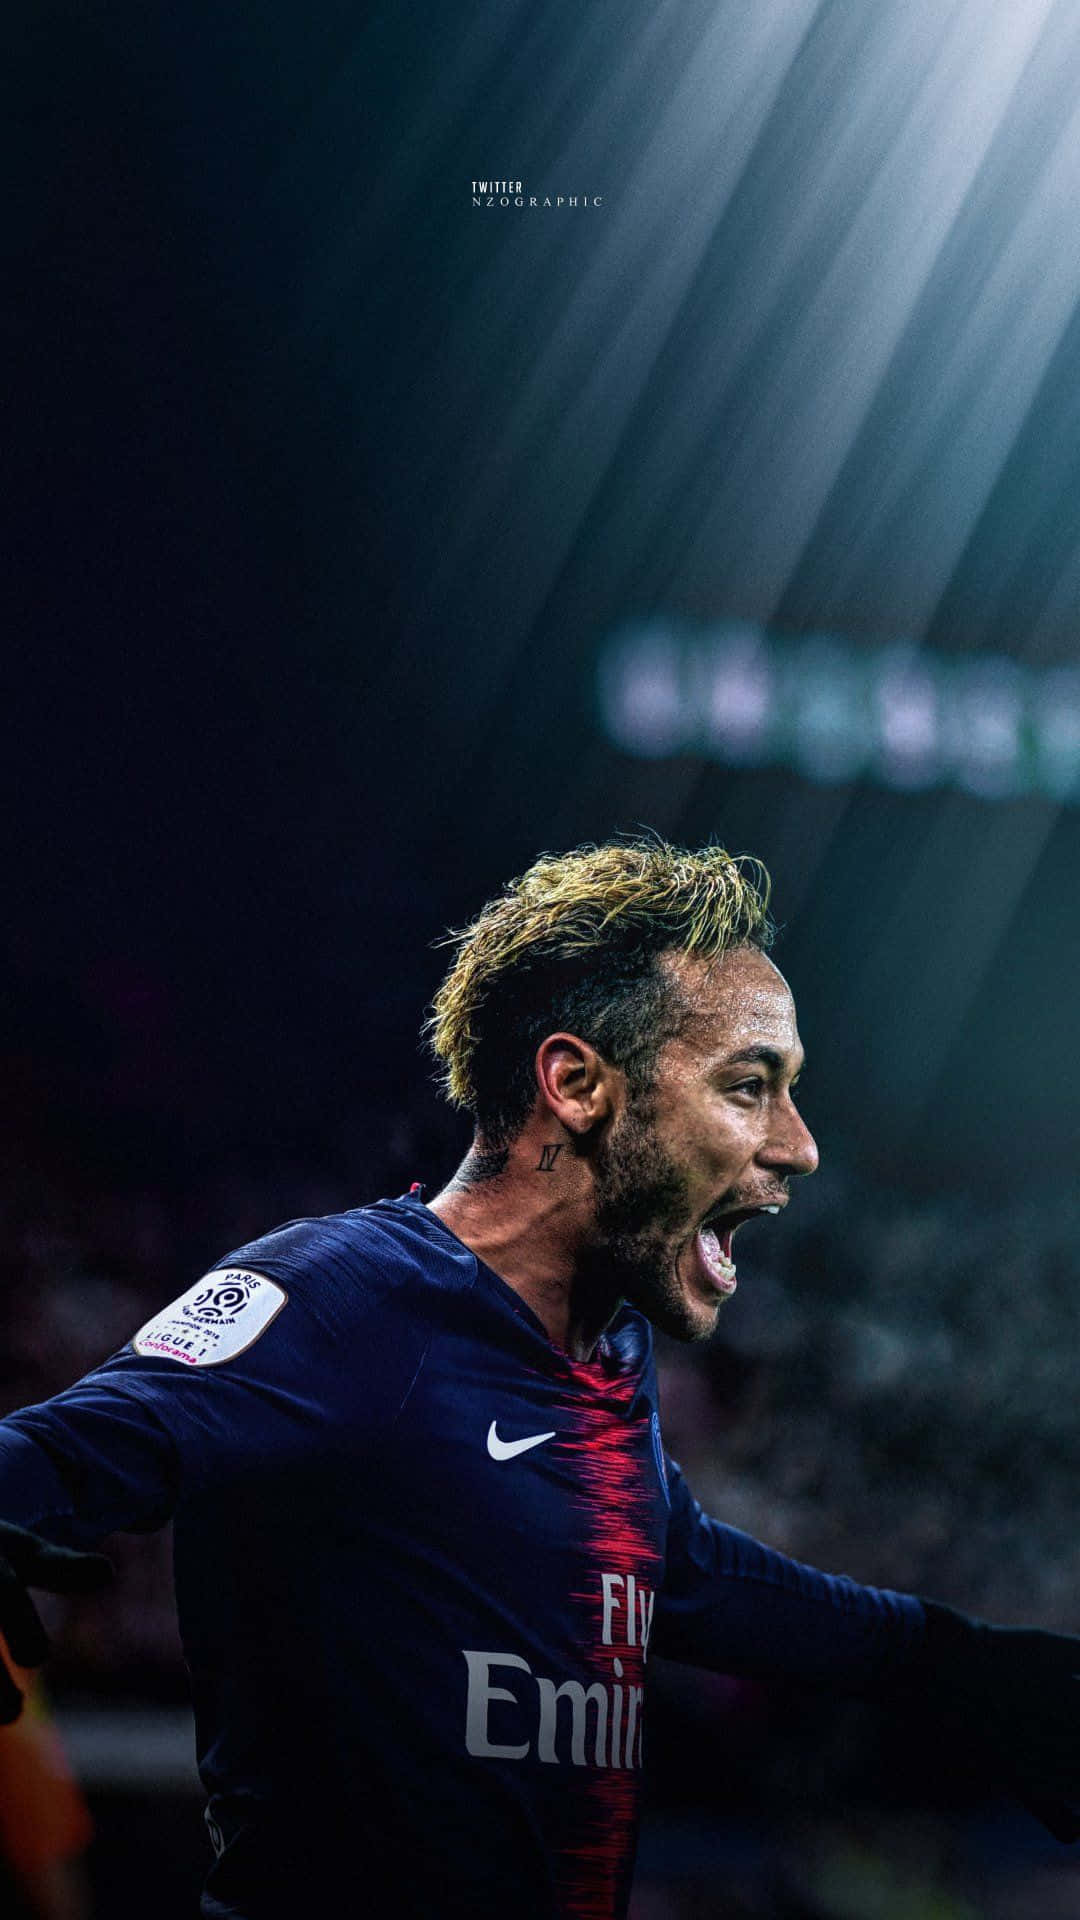 Image  Neymar with the New Iphone Wallpaper